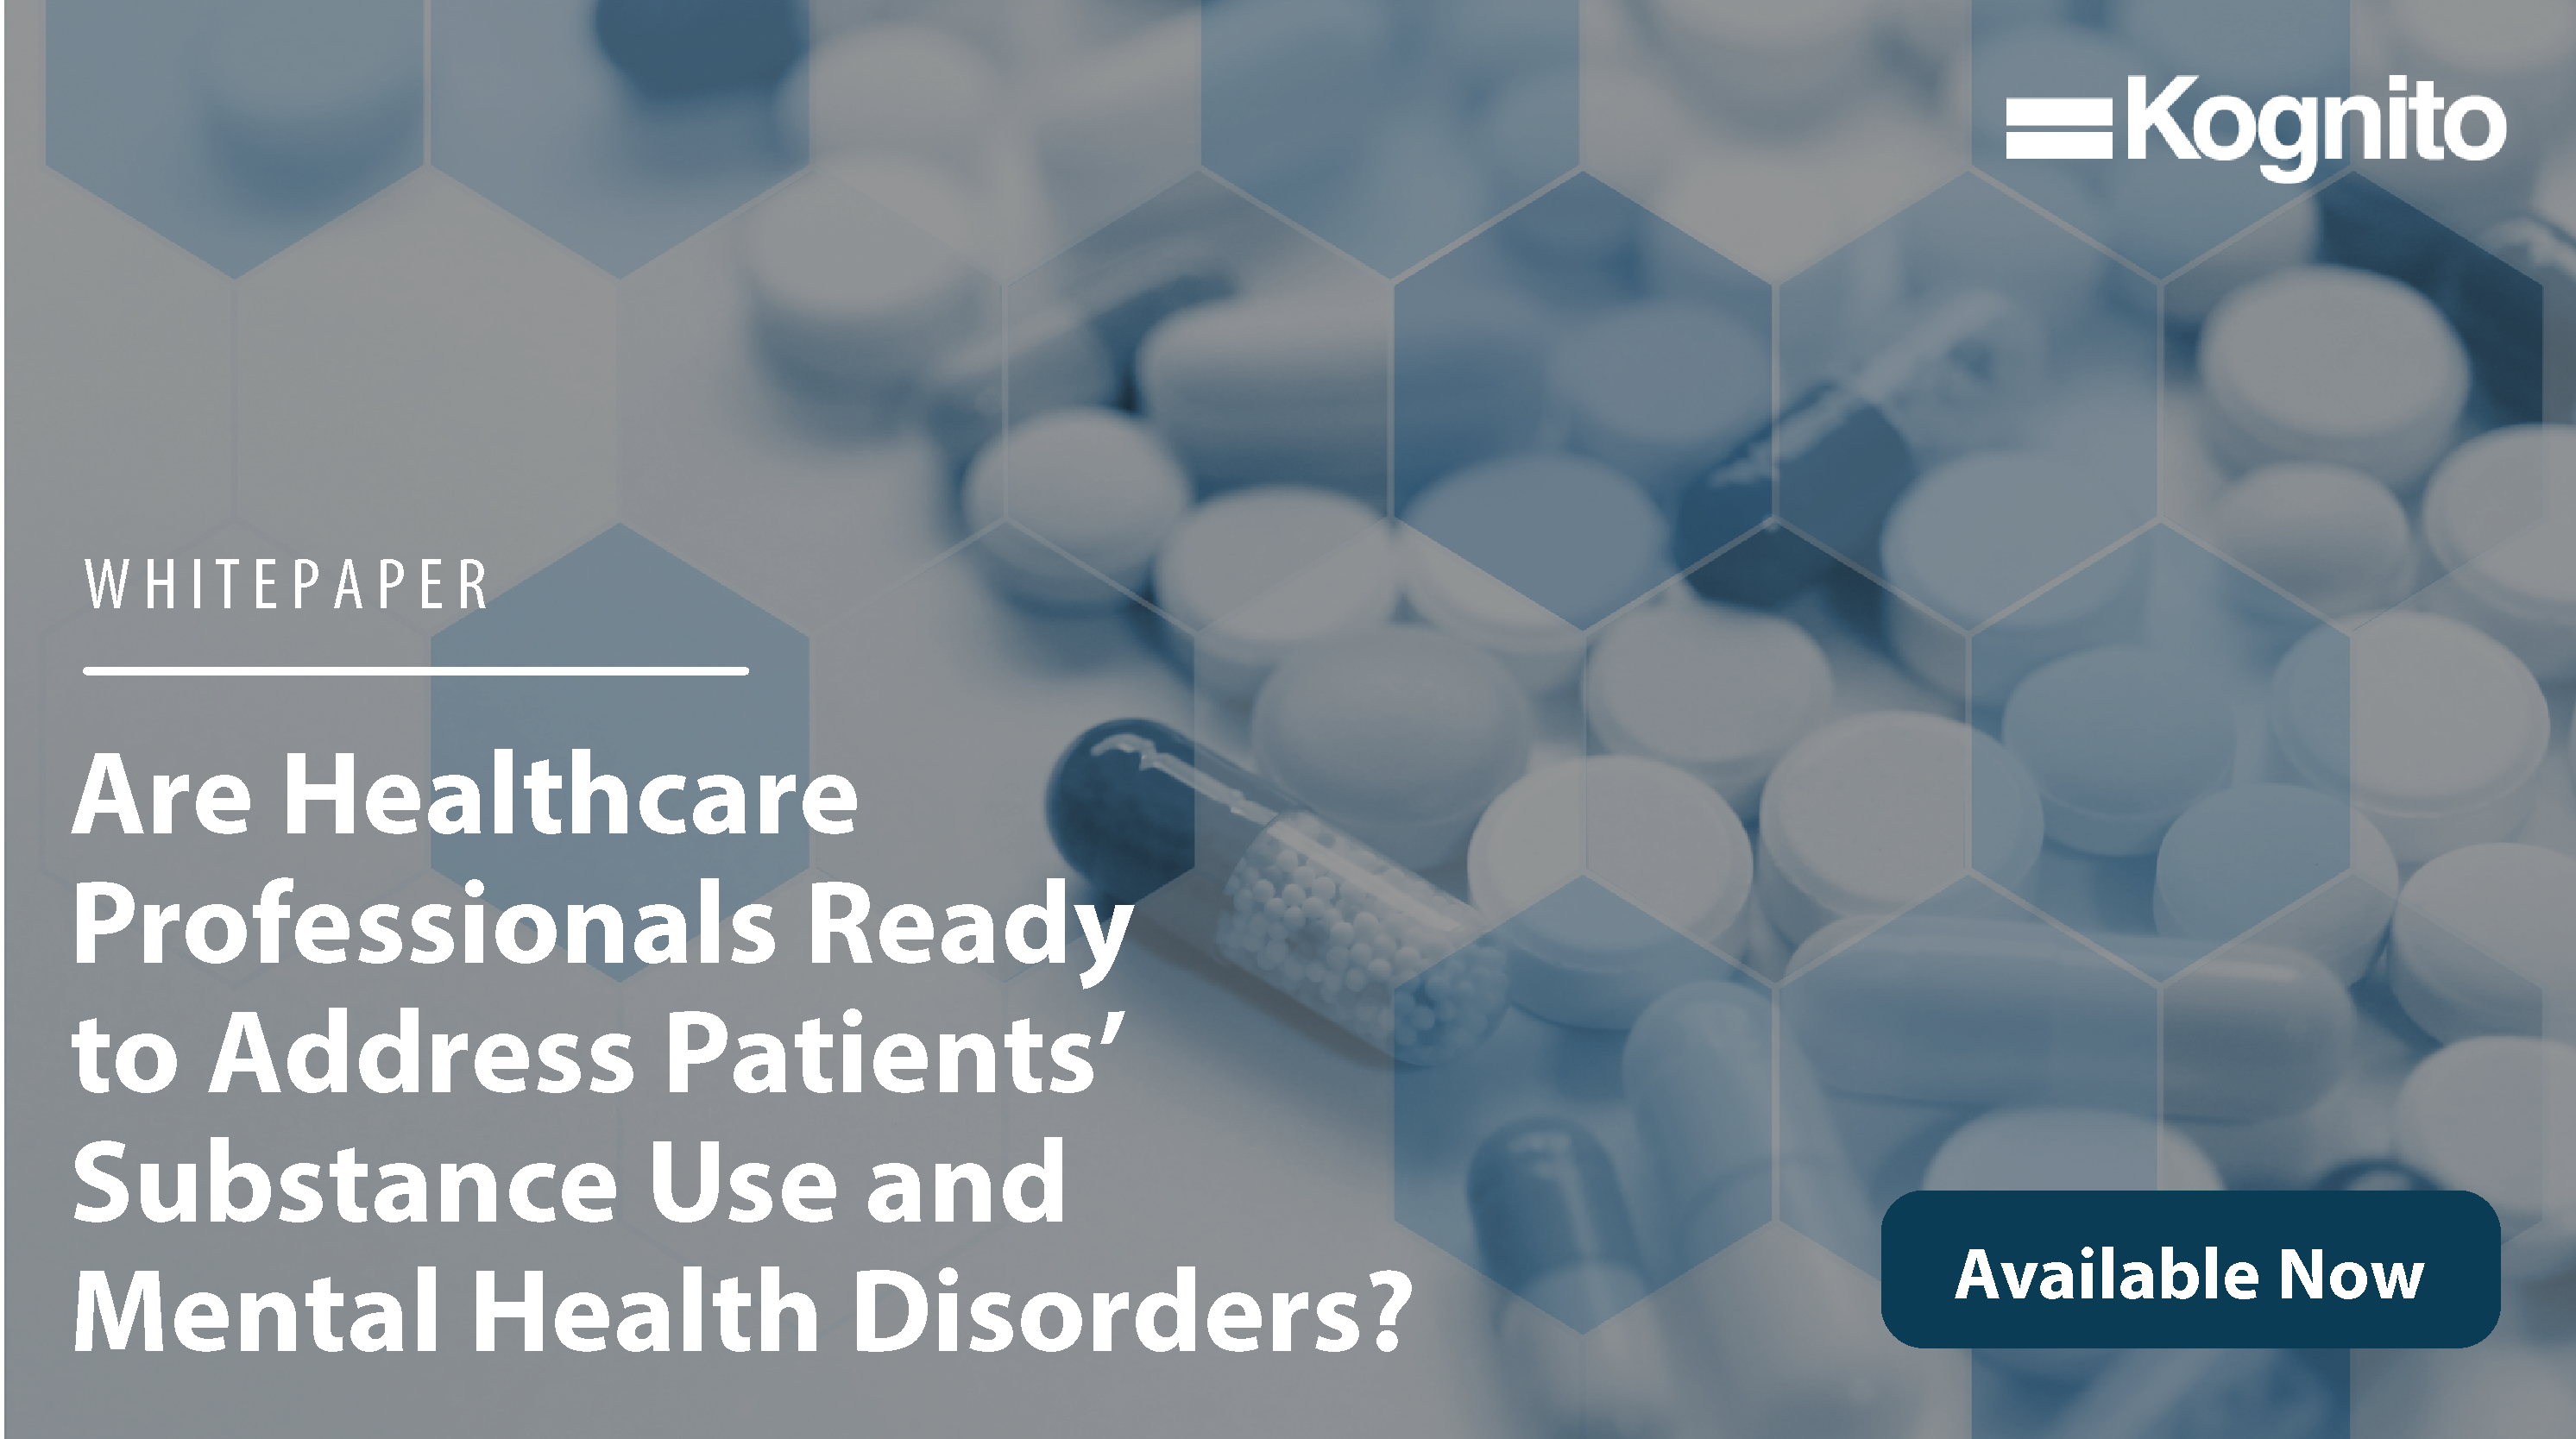 Are Healthcare Professionals Ready to Address Patients’ Substance Use and Mental Health Disorders?